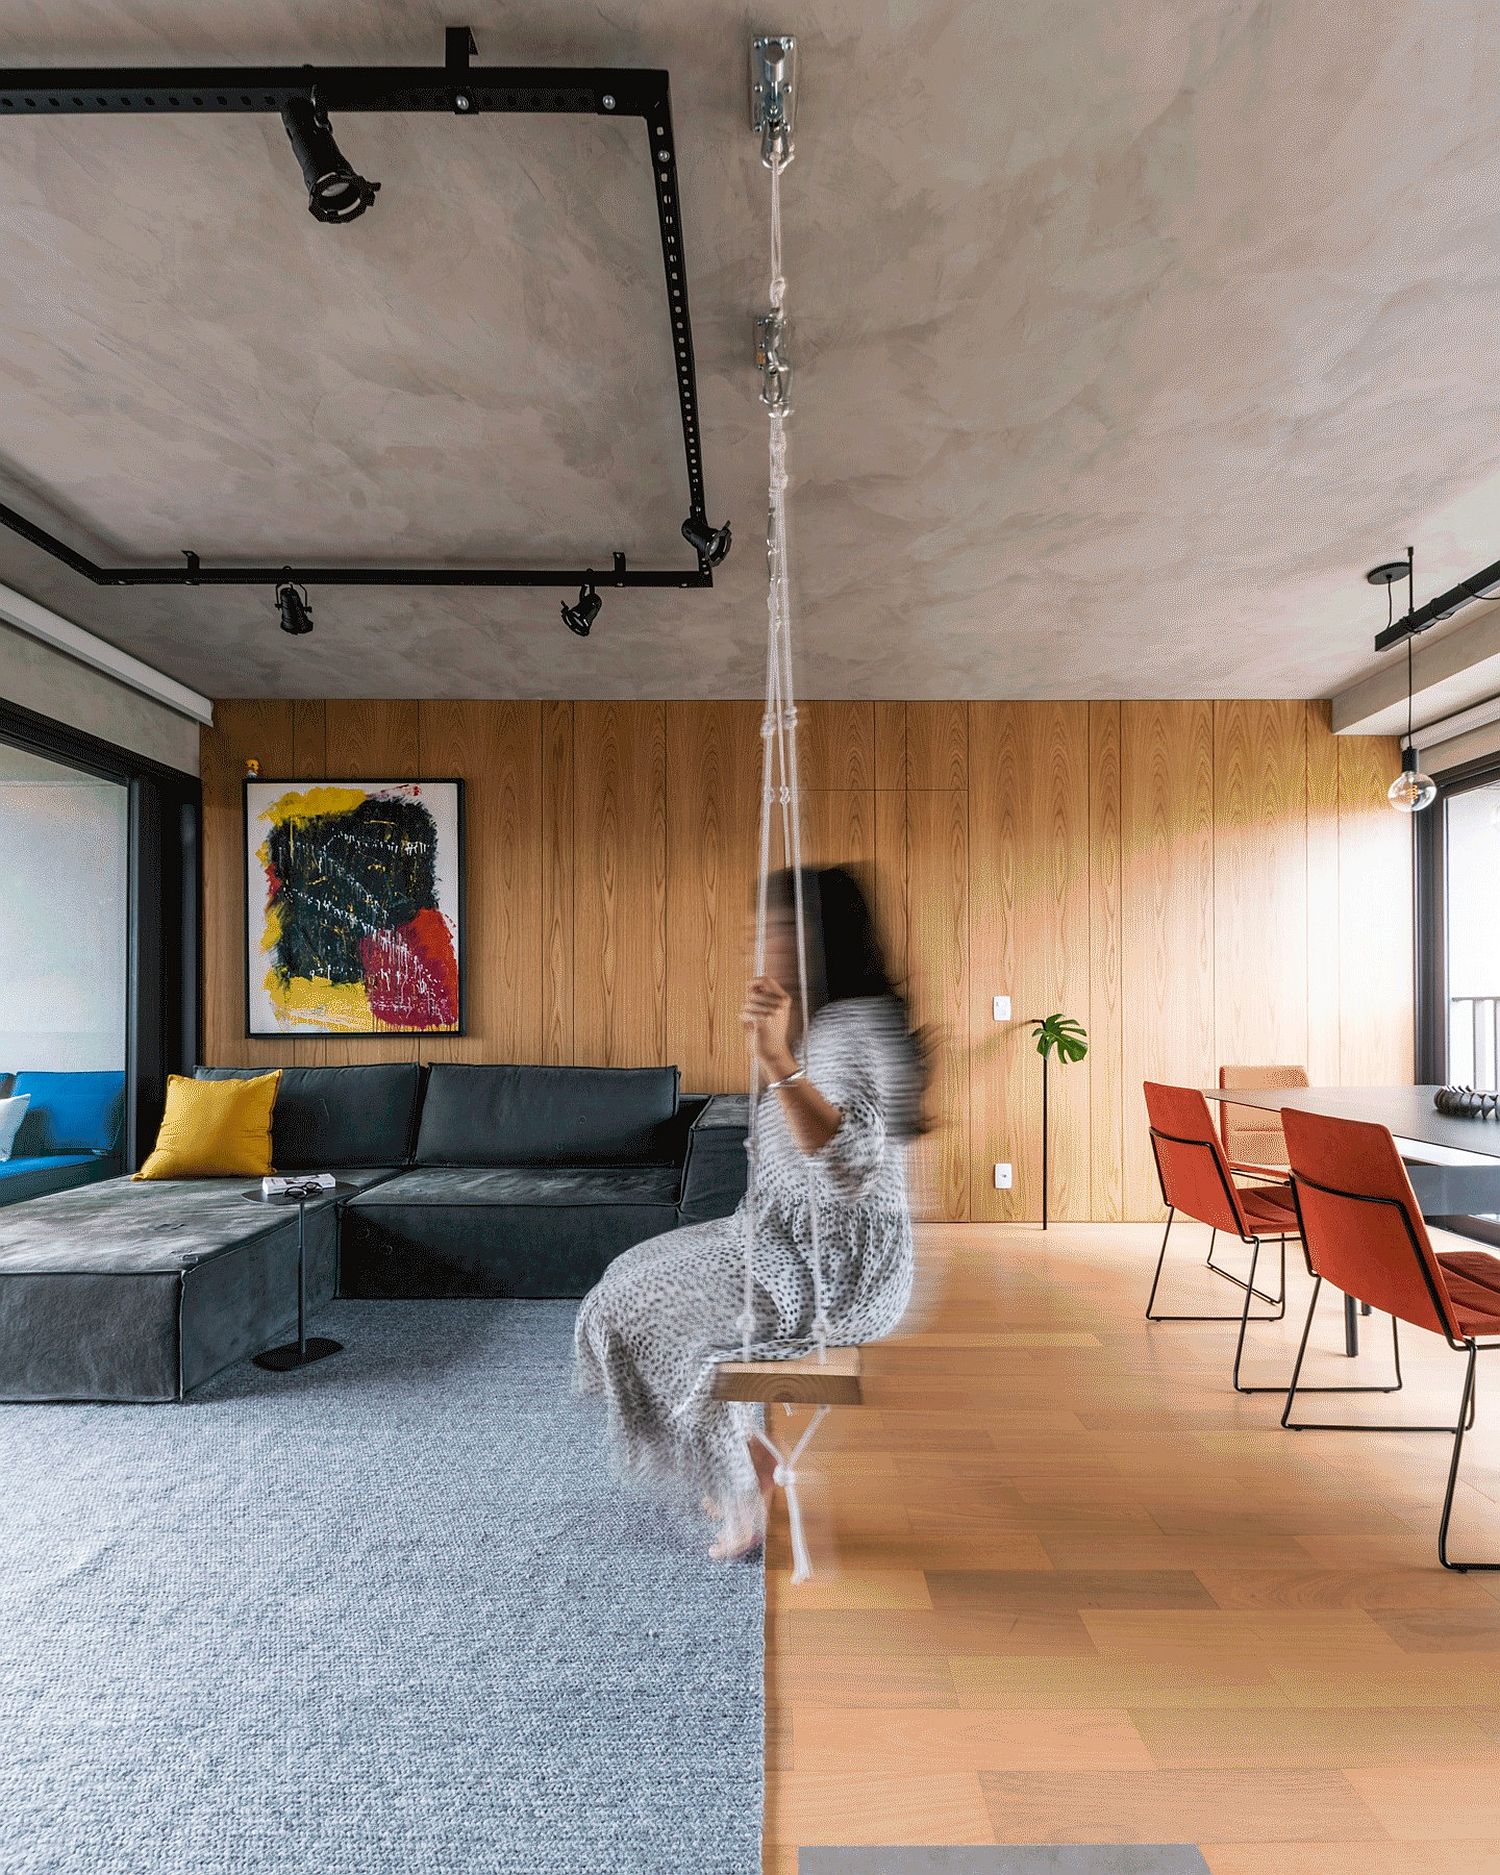 Swing in the living area keeps things cheerful and moving!